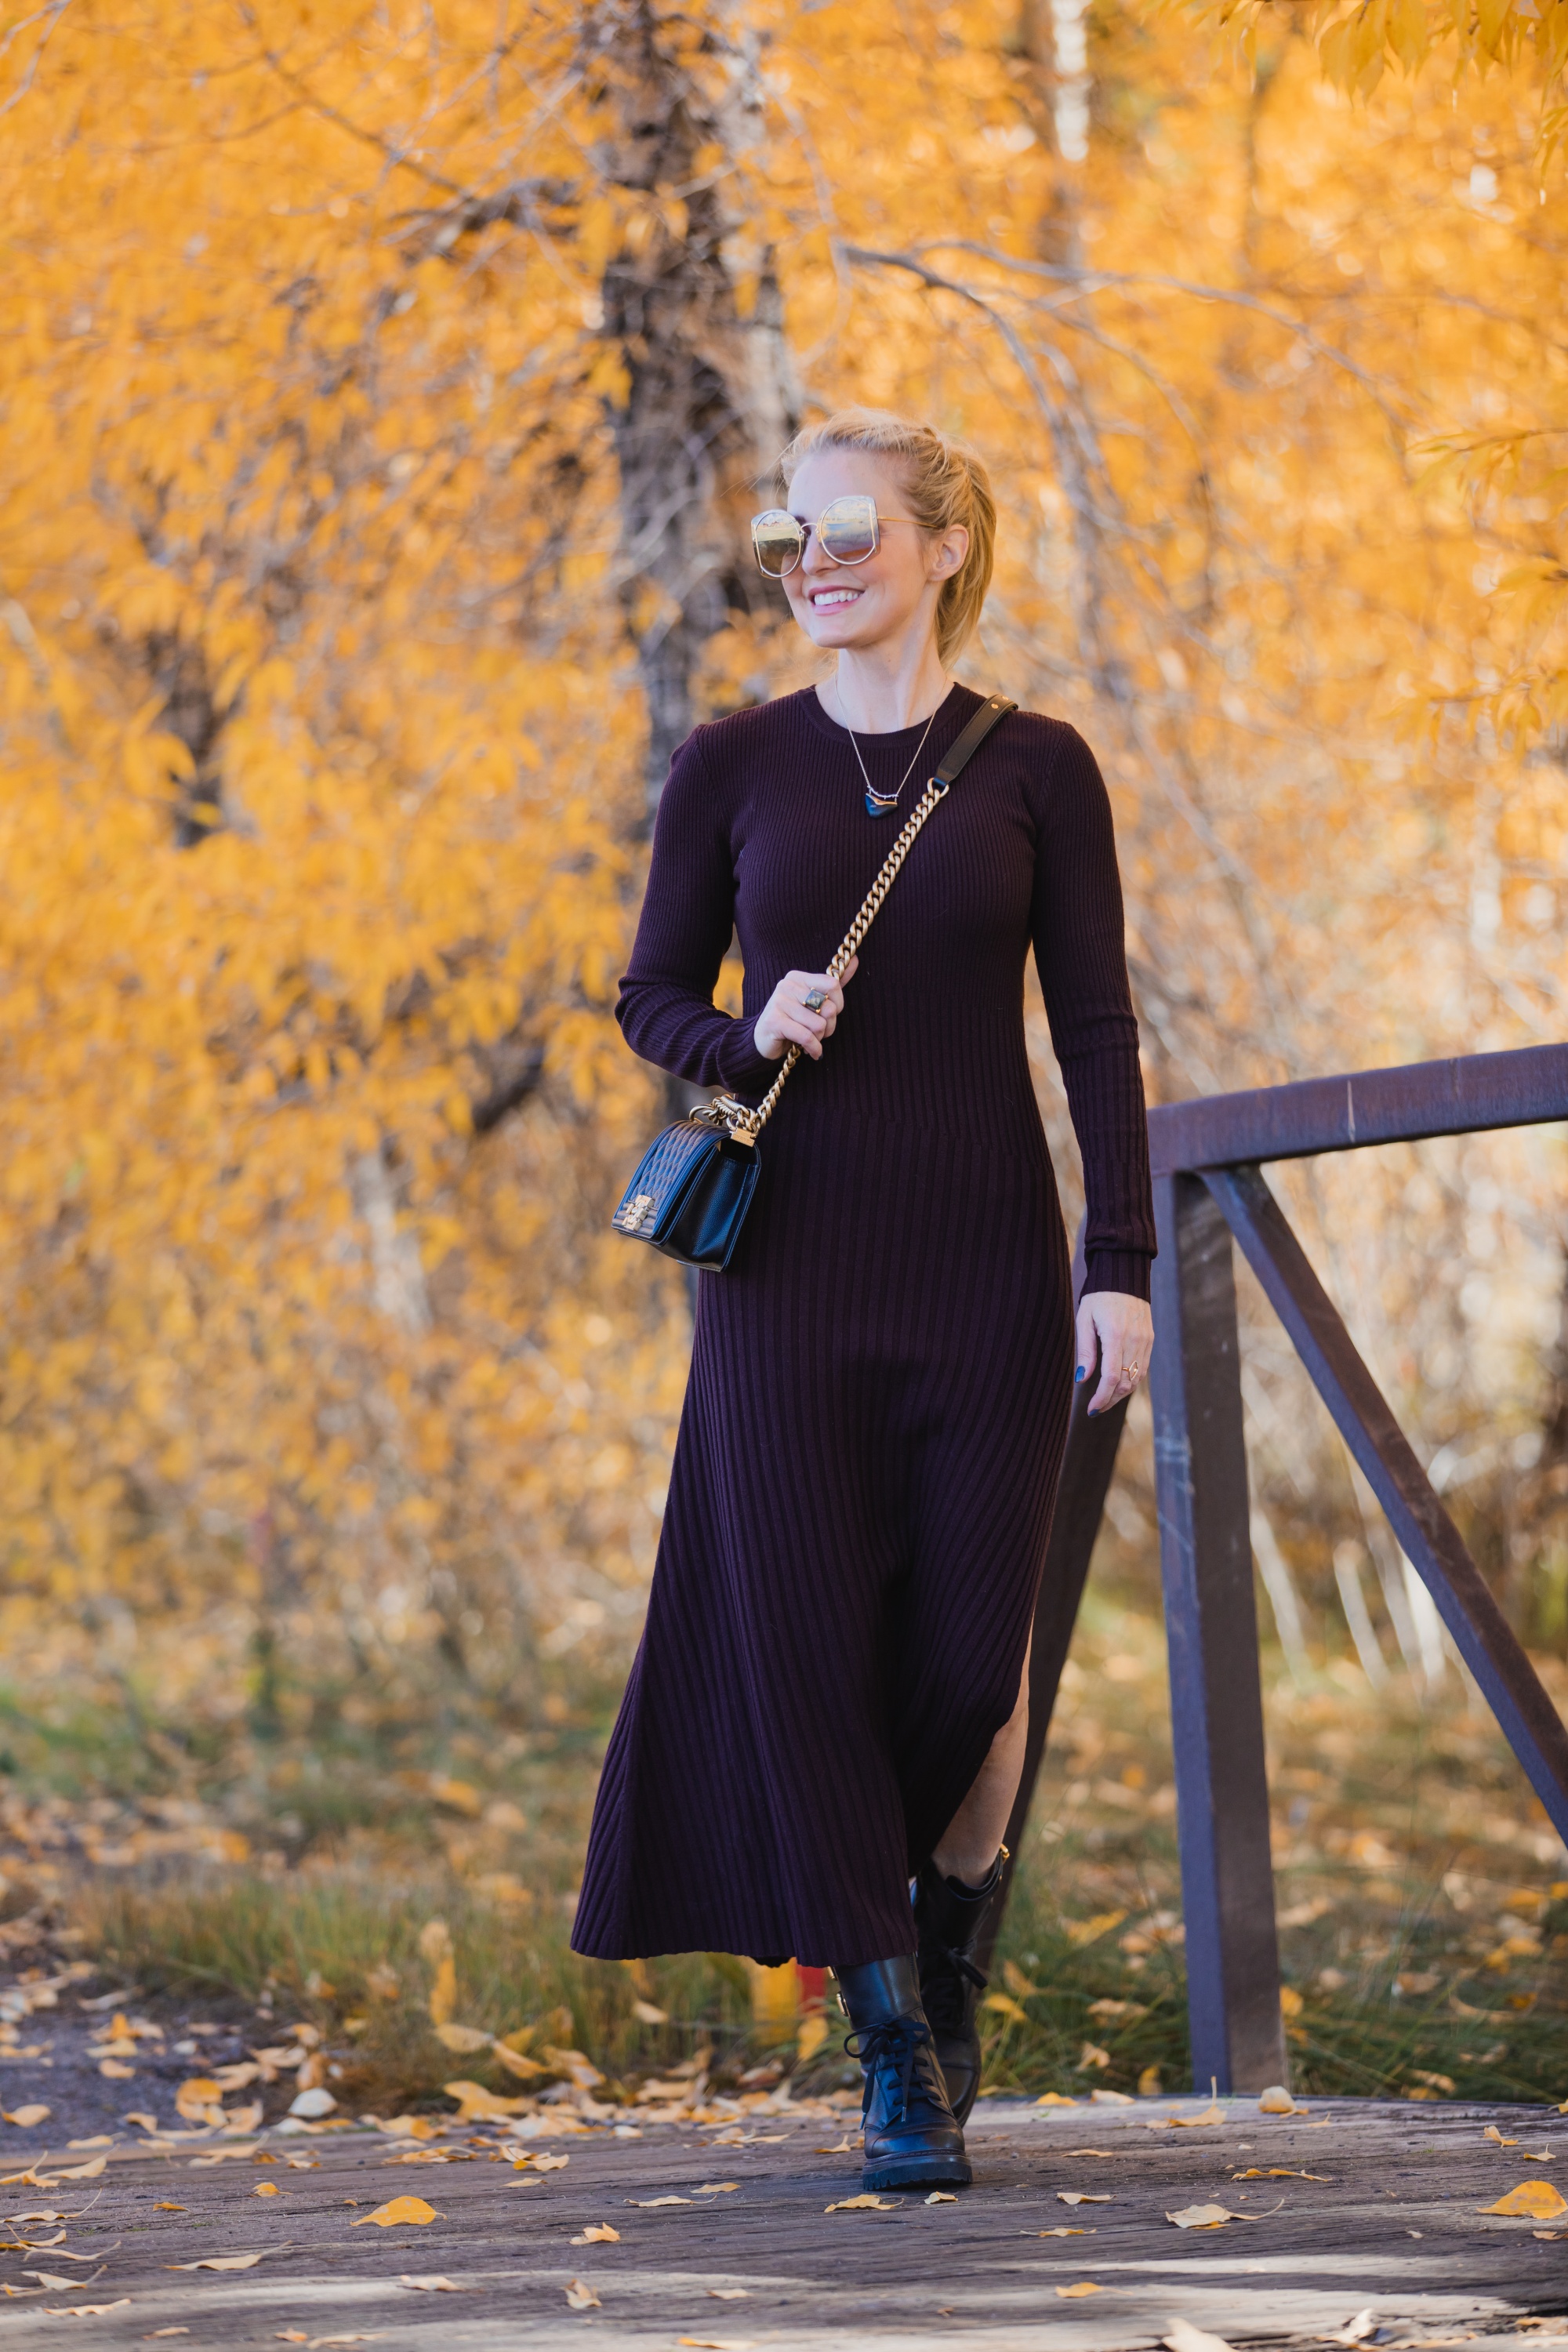 Borwn Sweater Dress, Erin Busbee of Busbee Style wearing an A.L.C. brown sweater dress with black combat boots by See by Chloe, black Chanel boy bag, Salvatore Ferragamo sunglasses, and Alexis Bittar necklace in Telluride, Colorado